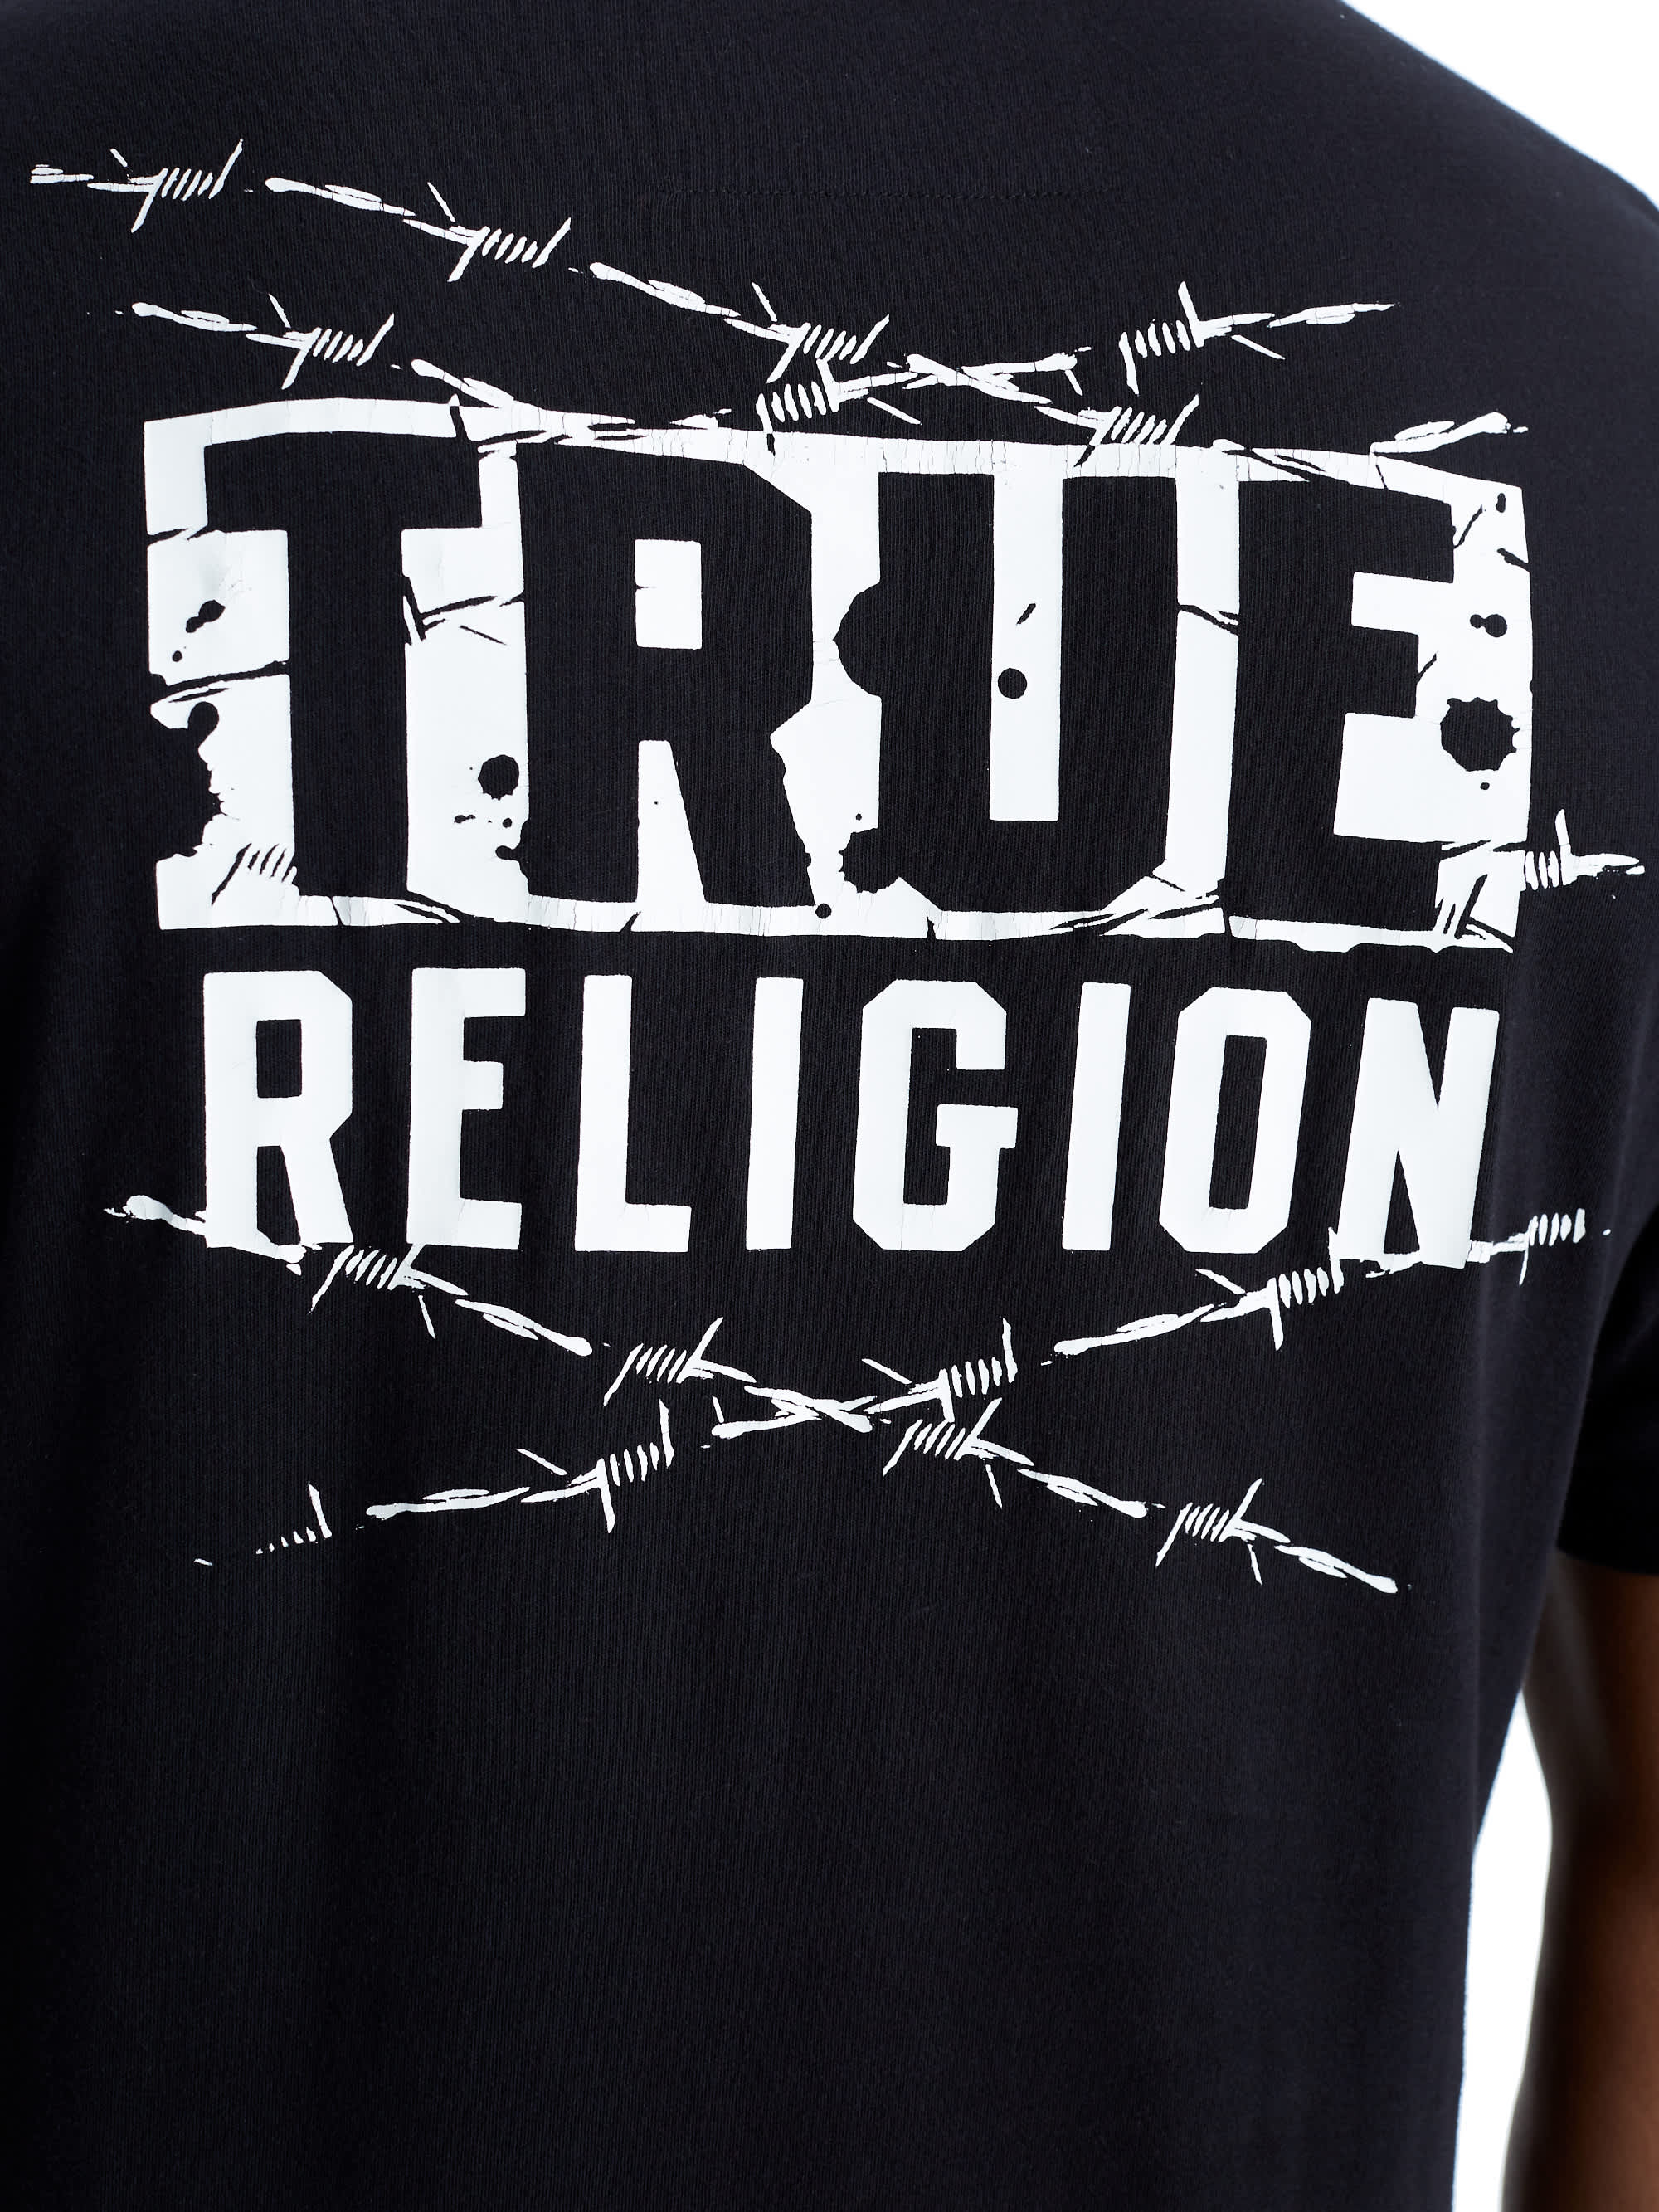 MENS BARBED WIRE GRAPHIC TEE